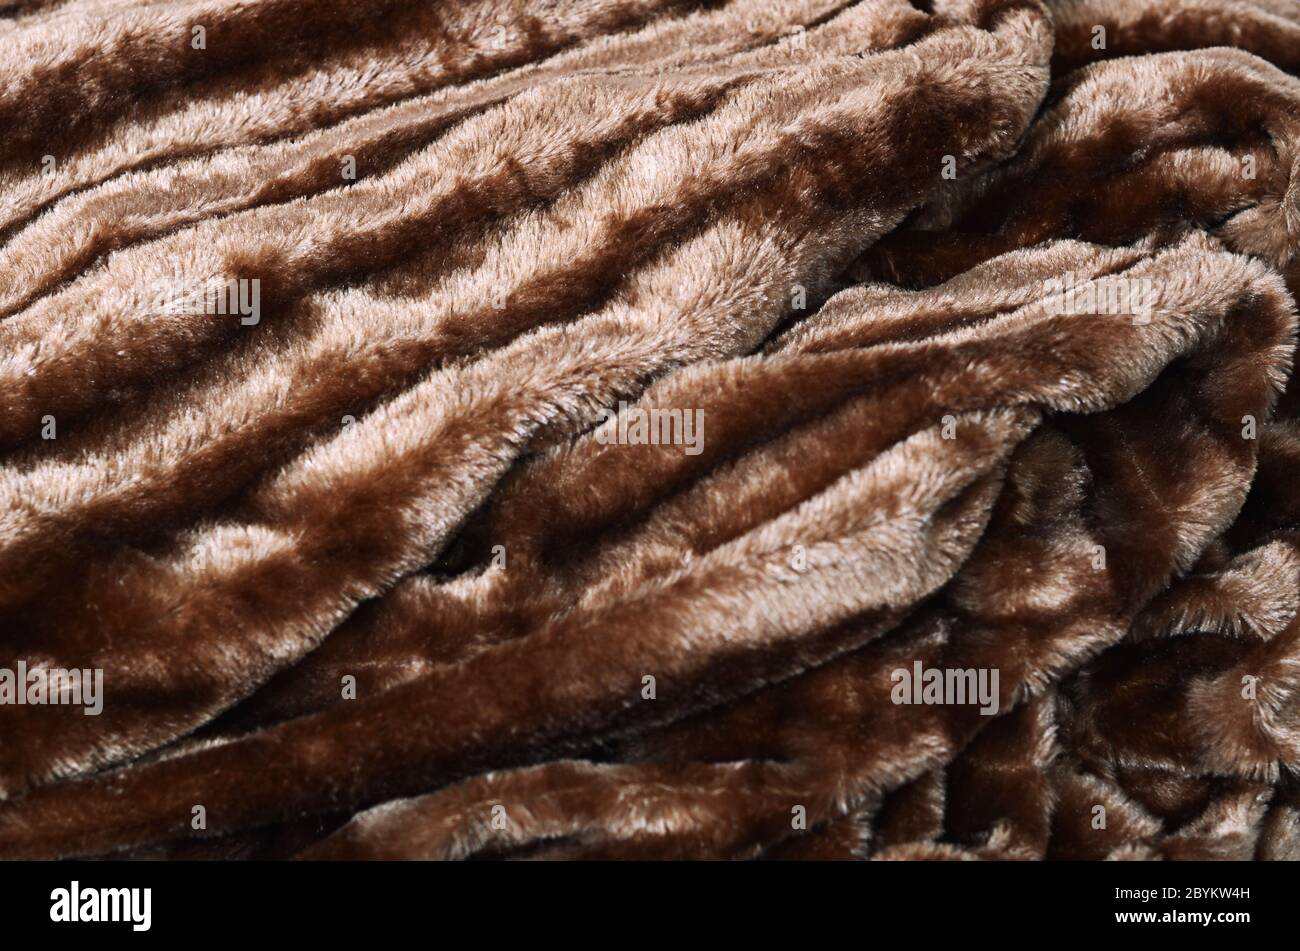 Brown fur as a background Stock Photo